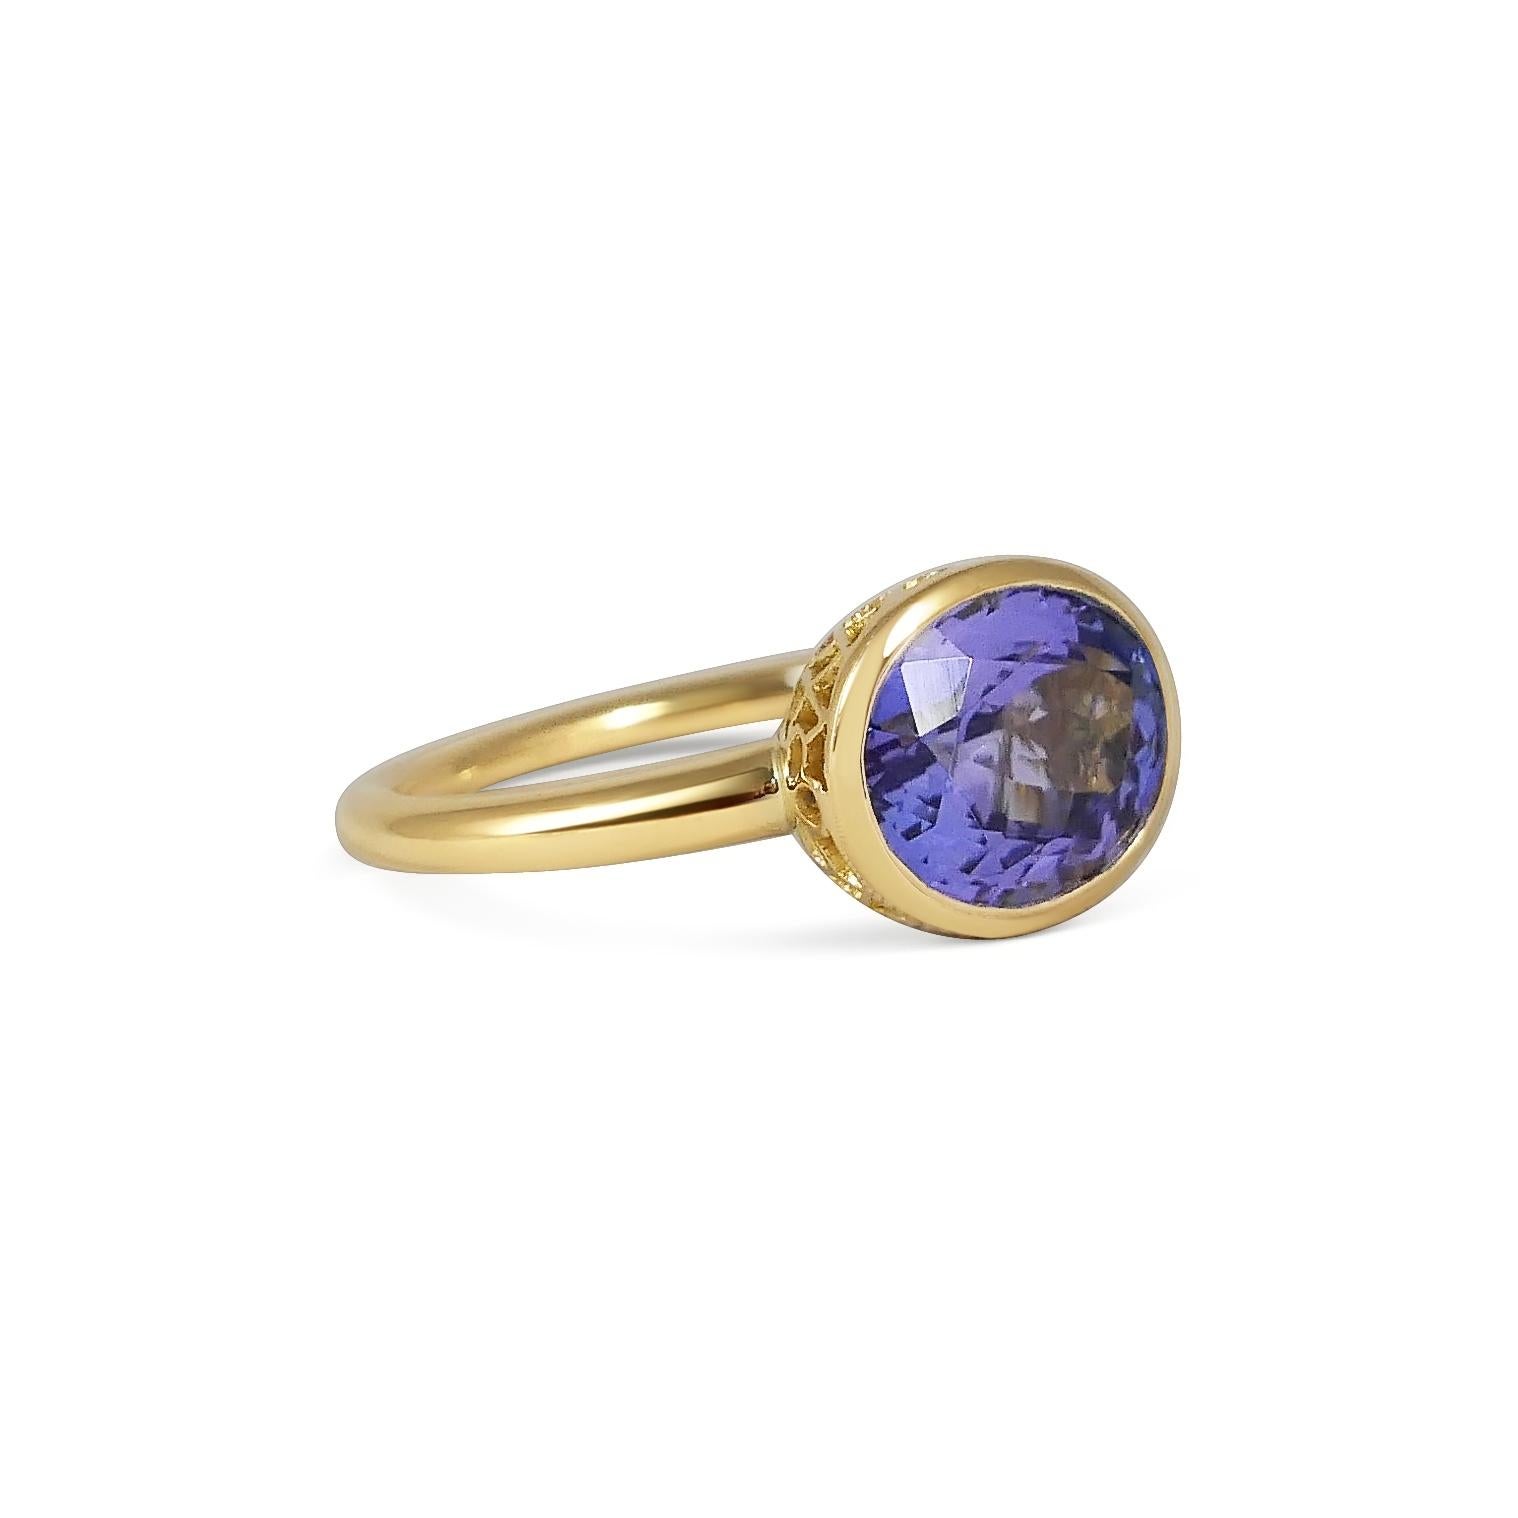 Handcrafted Oval Cut 4,70 Carats Tanzanite 18 Karat Yellow Gold Cocktail Ring. Our expert craftsmen hand pierce our iconic gold lace to fit each stone on a tapered band making each ring One of a Kind. This unique technique, inspired by our